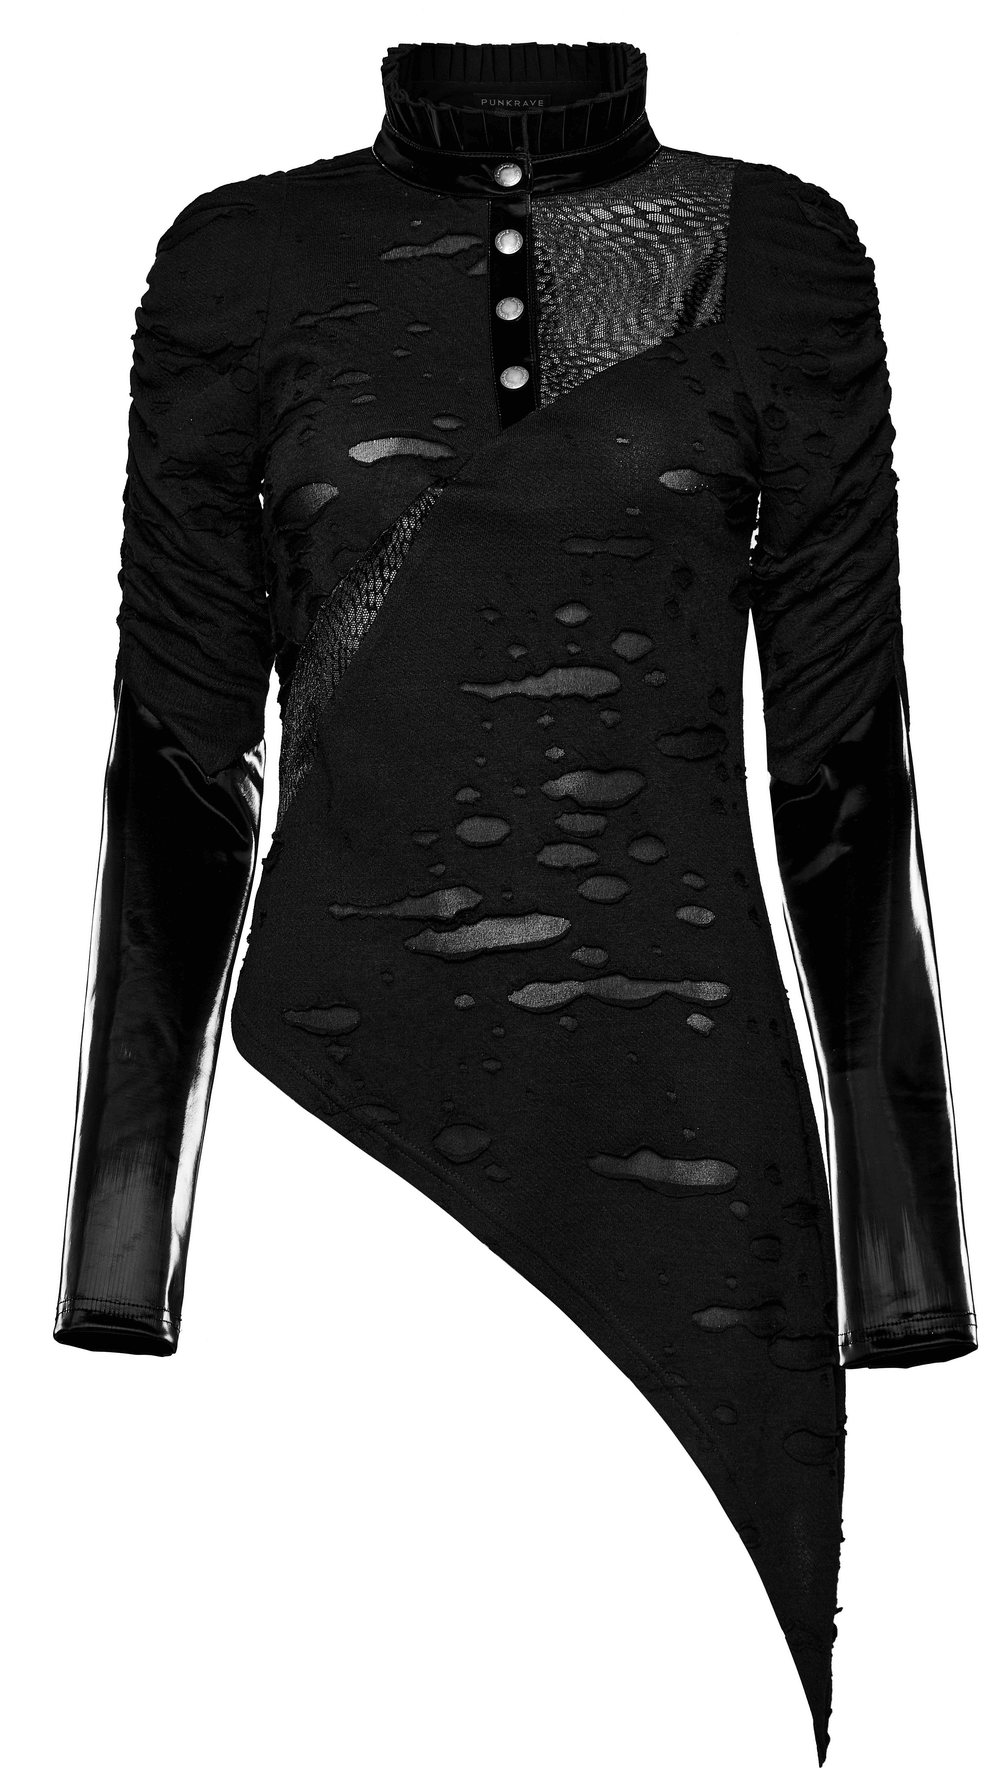 Edgy Goth Black Distressed Asymmetrical Top with Holes